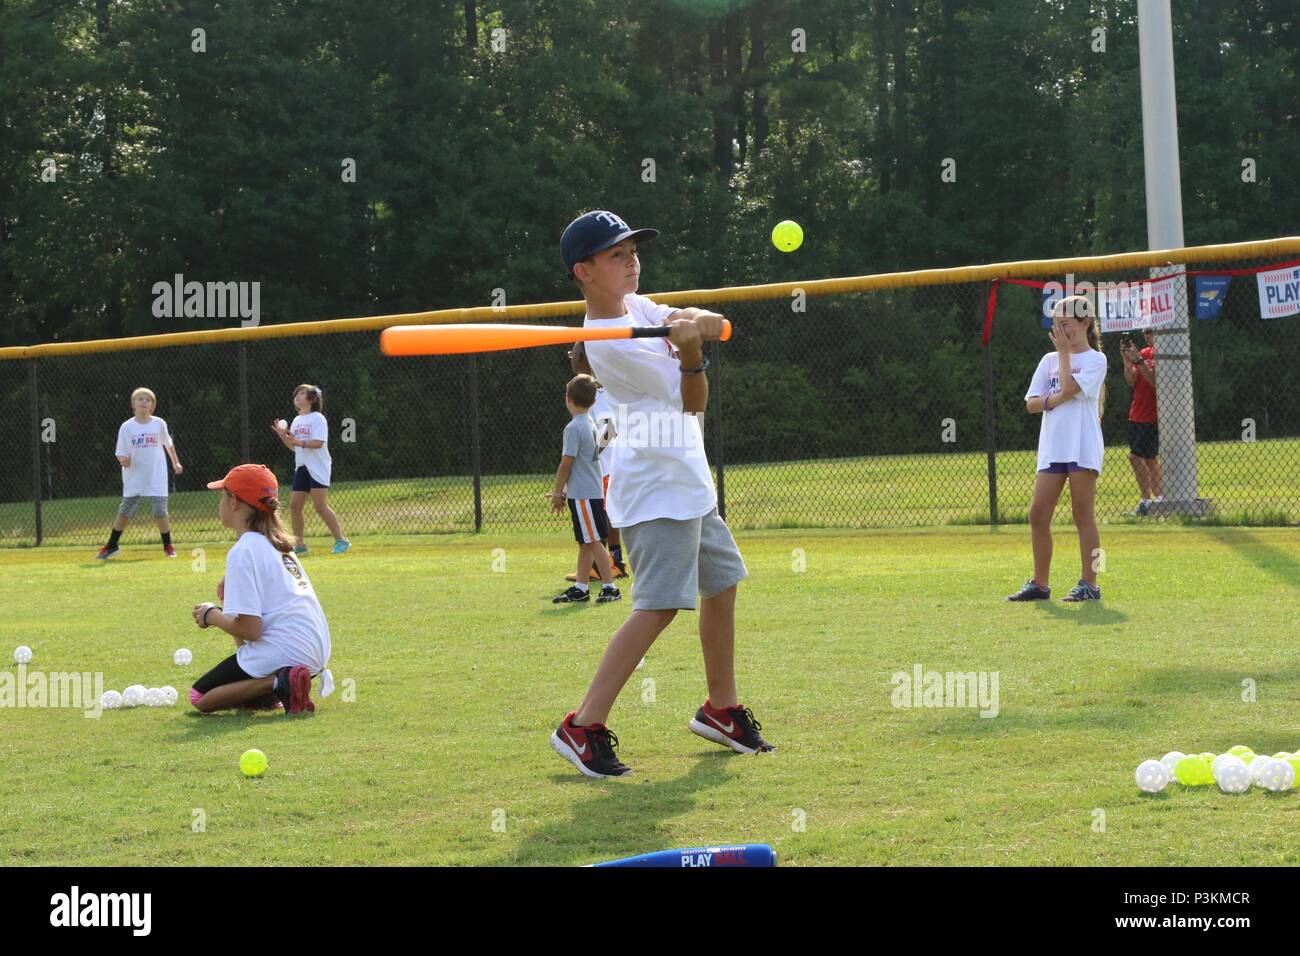 A young baseball fan takes his base while participating in a friendly  pick-up game with other kids during the MLB PLAY BALL event at Fort Bragg,  N.C., July 2, 2016. PLAY BALL